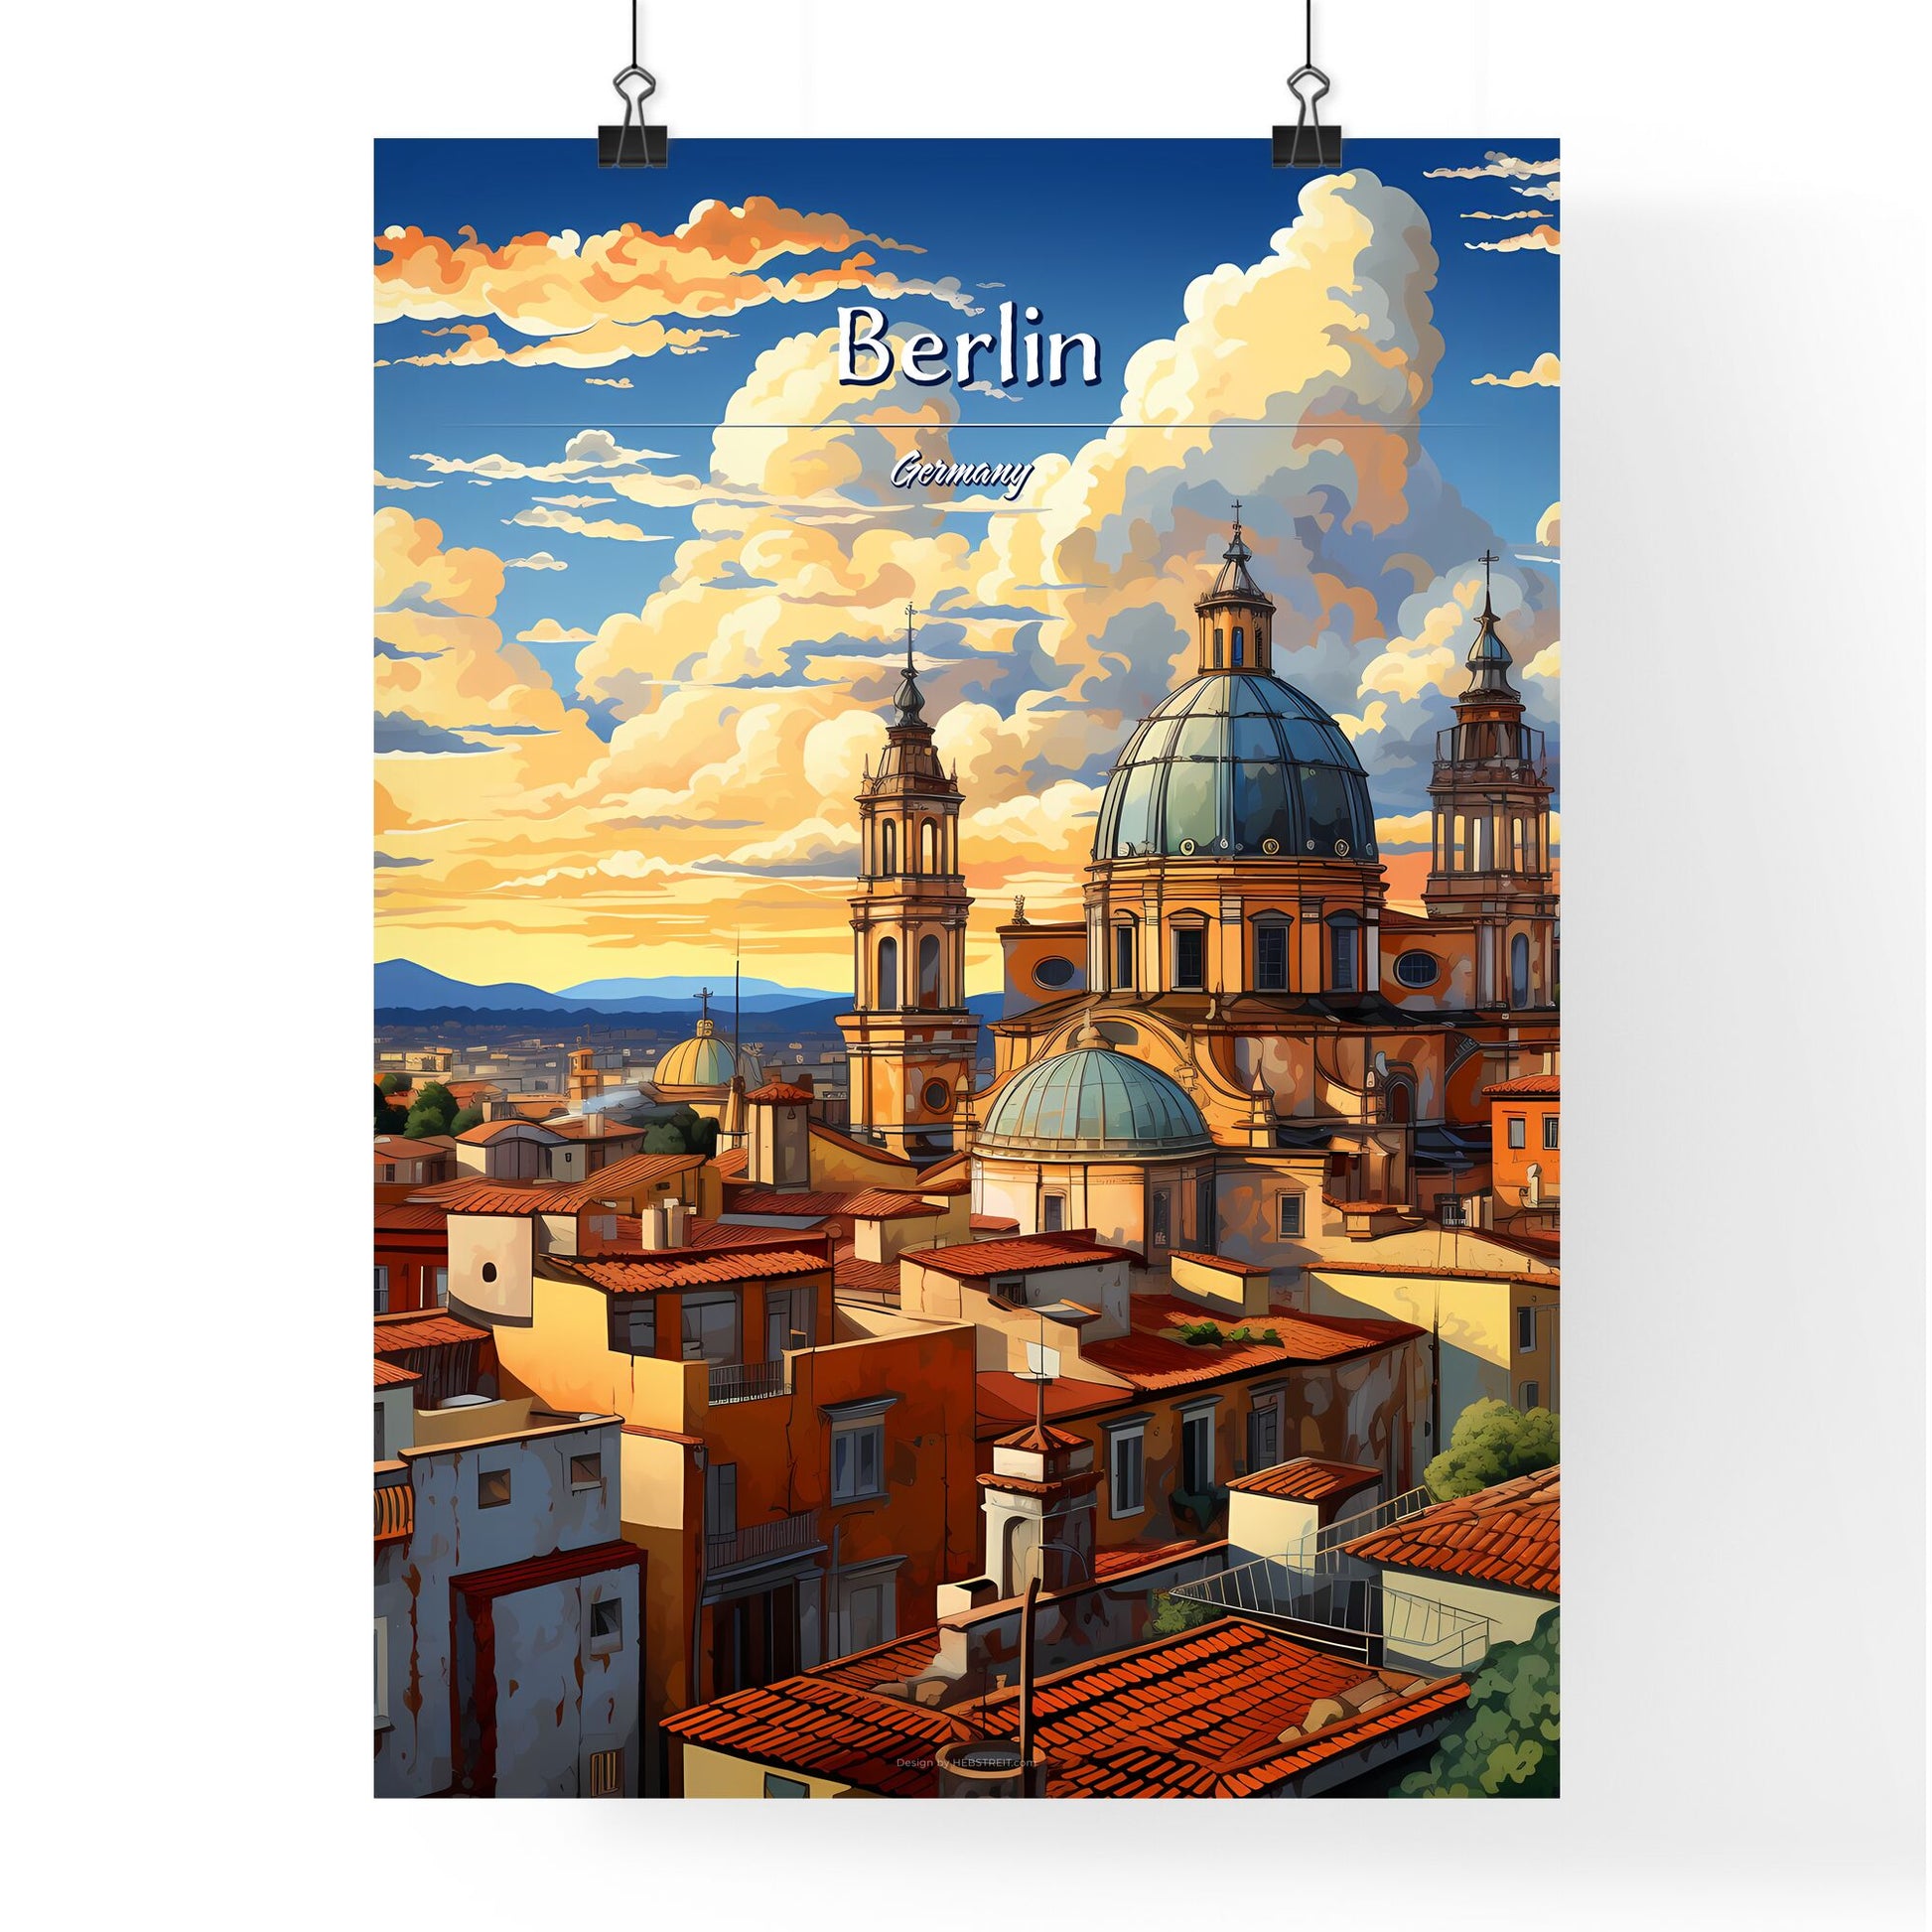 On the roofs of Berlin, Germany - Art print of a city with a dome and towers Default Title